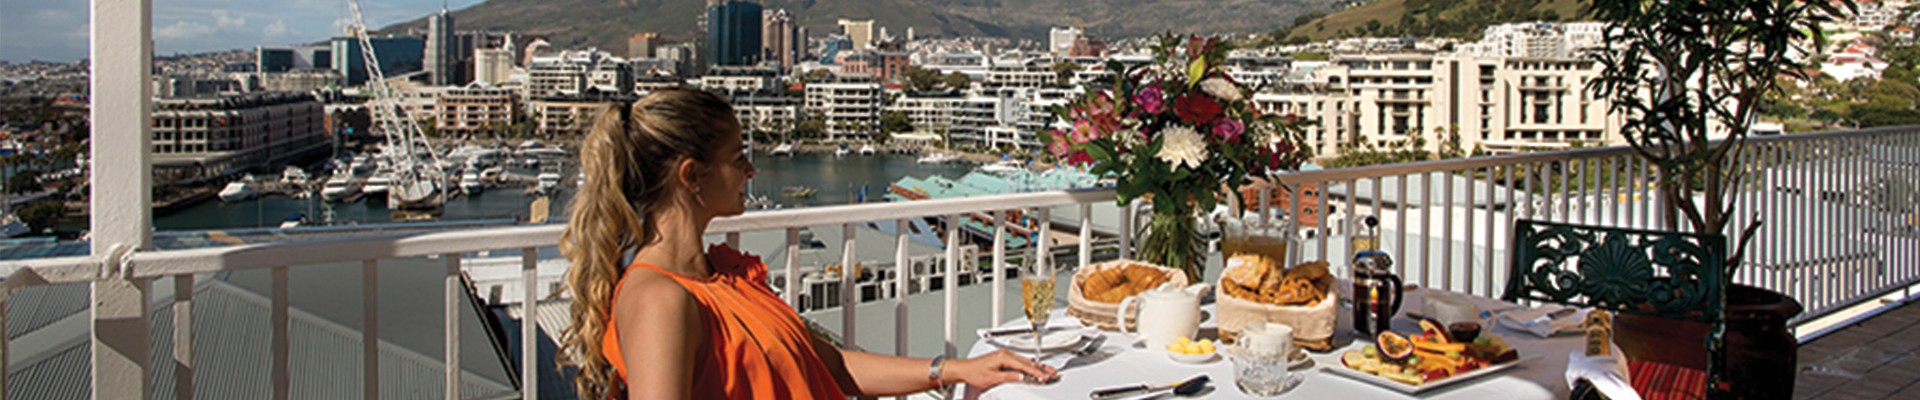 4* The Commodore Hotel - V&A Waterfront Package (2 Nights)